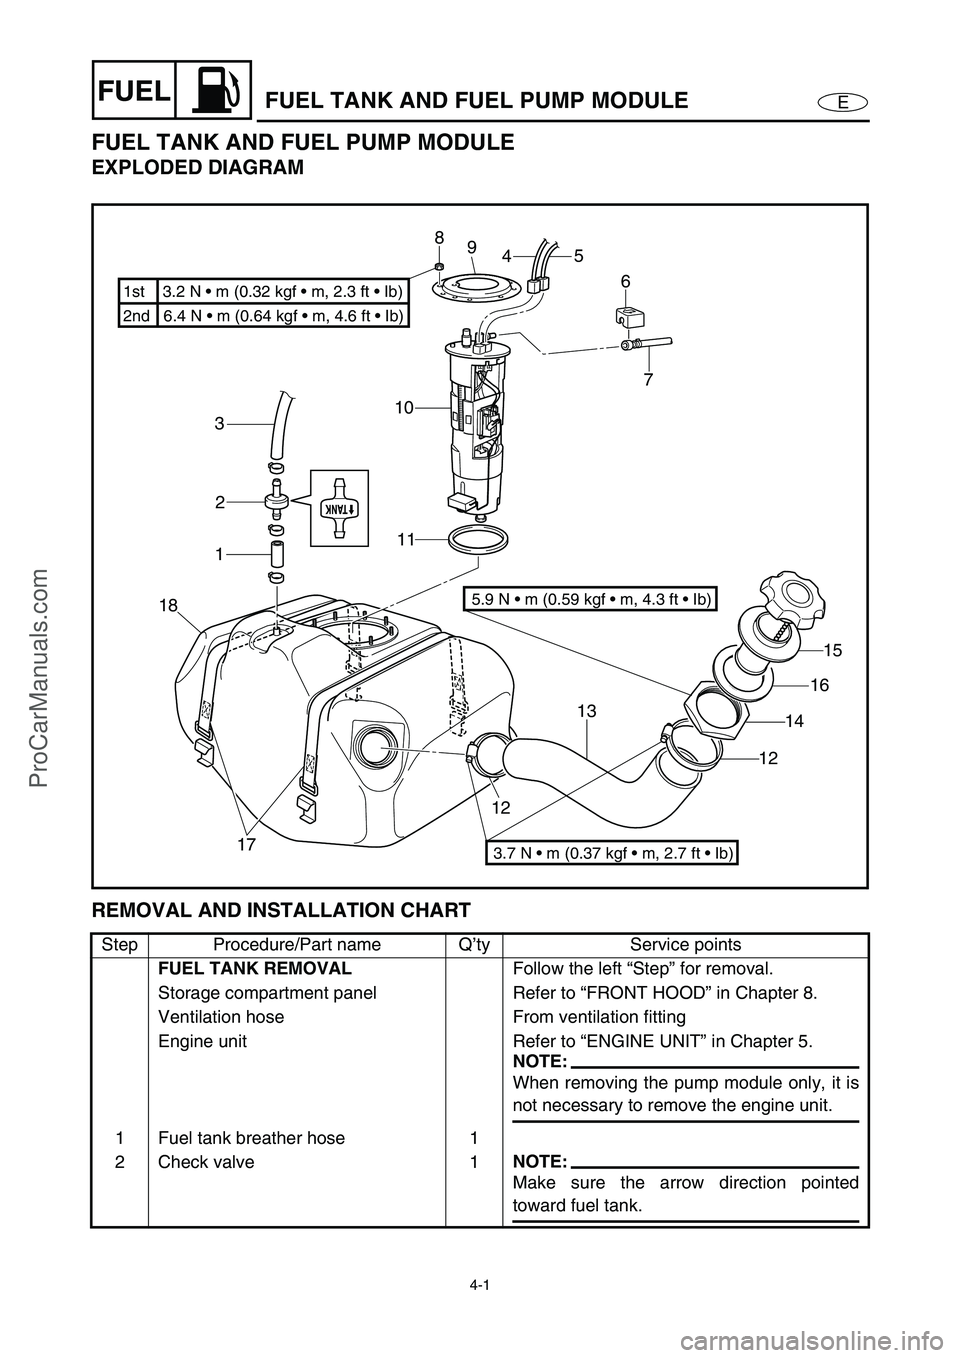 YAMAHA VX110 2005  Service Manual 4-1
EFUELFUEL TANK AND FUEL PUMP MODULE
FUEL TANK AND FUEL PUMP MODULE
EXPLODED DIAGRAM
REMOVAL AND INSTALLATION CHART
Step Procedure/Part name Q’ty Service points
FUEL TANK REMOVAL
Follow the left 